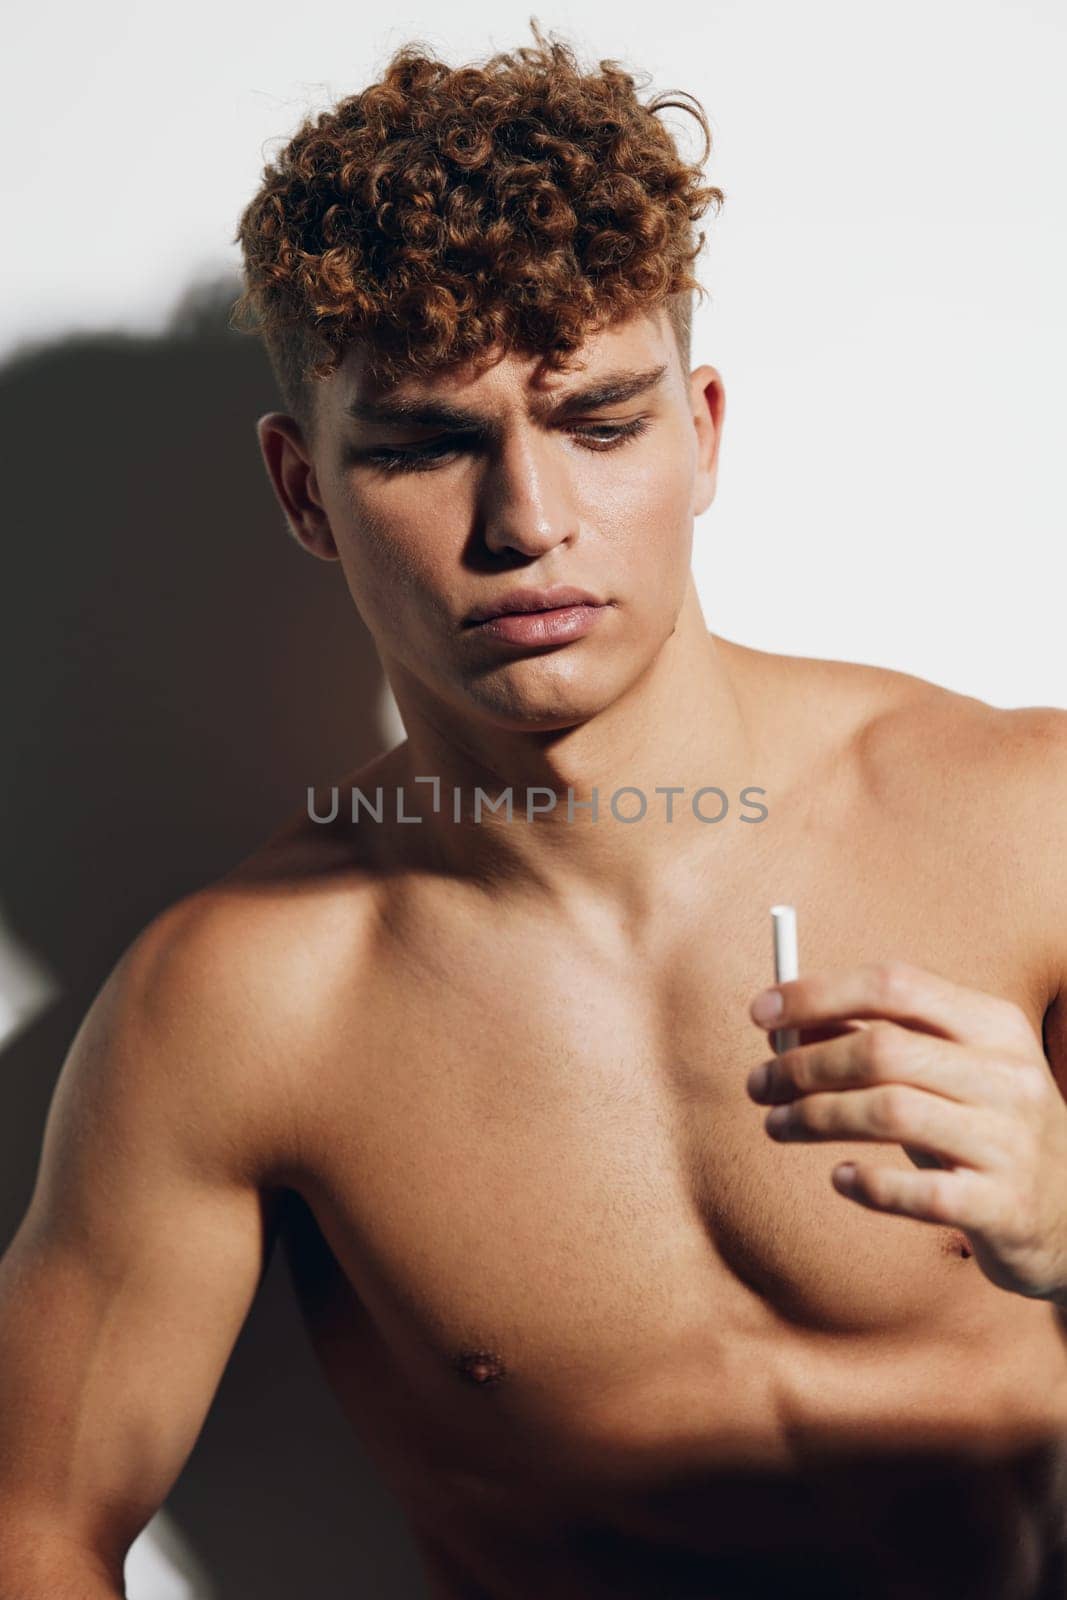 man smile attractive naked athlete white background adult smokes person health young muscular background strong chest gray abs handsome athletic bodybuilder studio